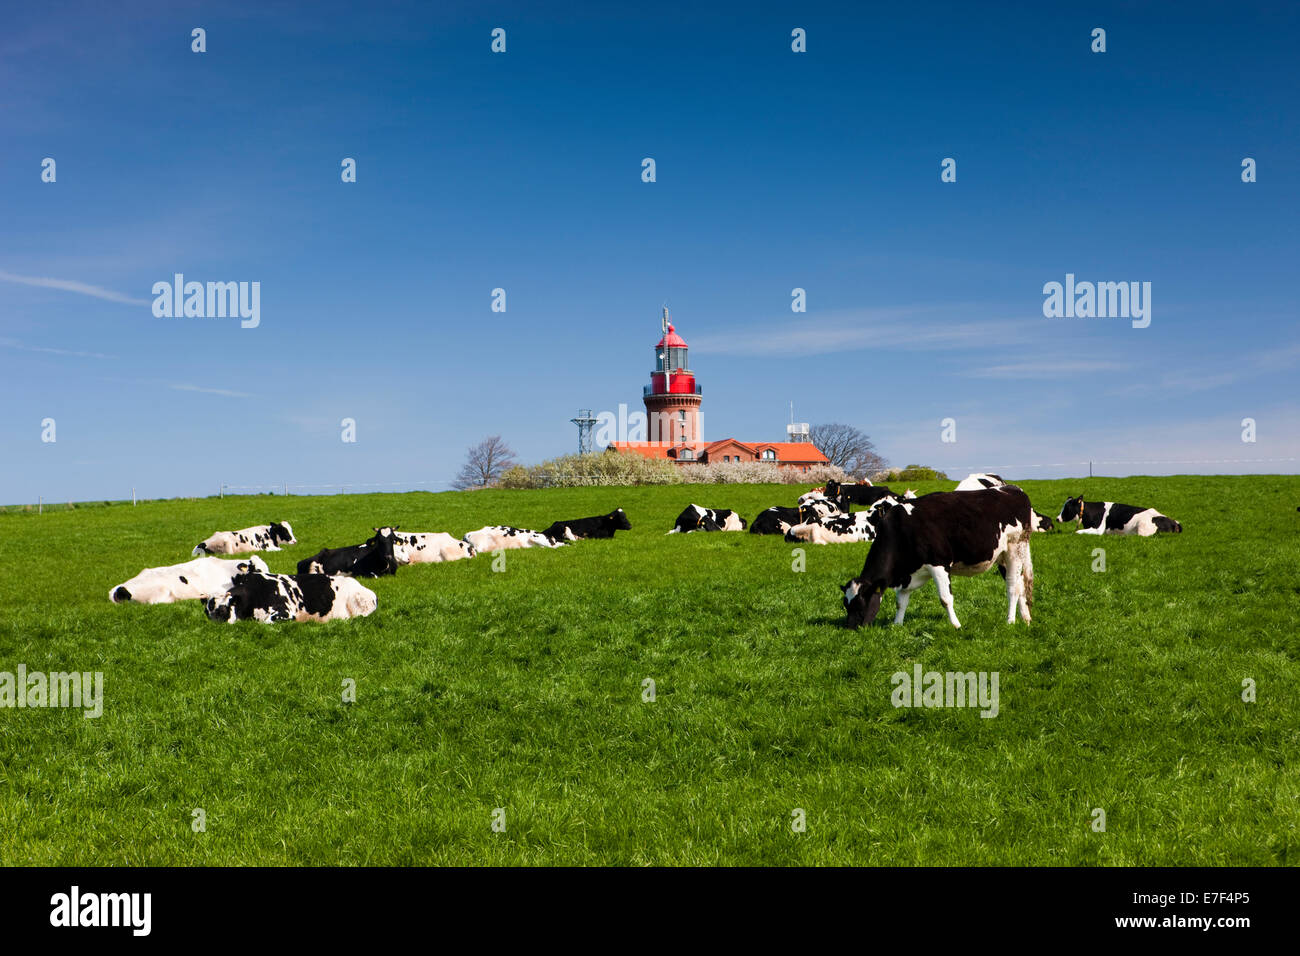 Cows grazing in front of the Bastorf lighthouse, Bastorf, Mecklenburg-Western Pomerania, Germany Stock Photo